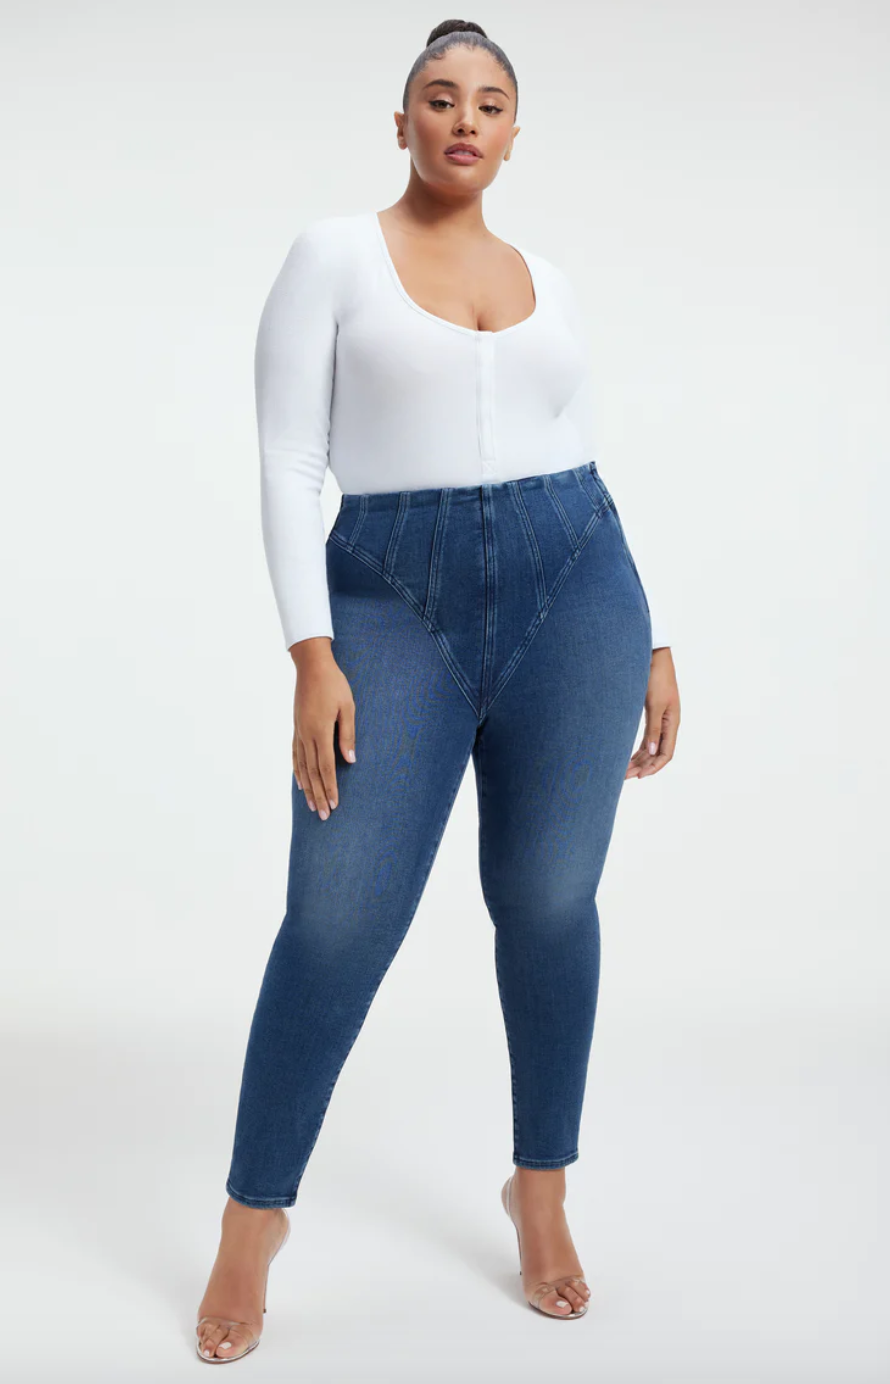 3 Hottest Plus-Size Denim Styles to Try in 2023 - Shonda Style